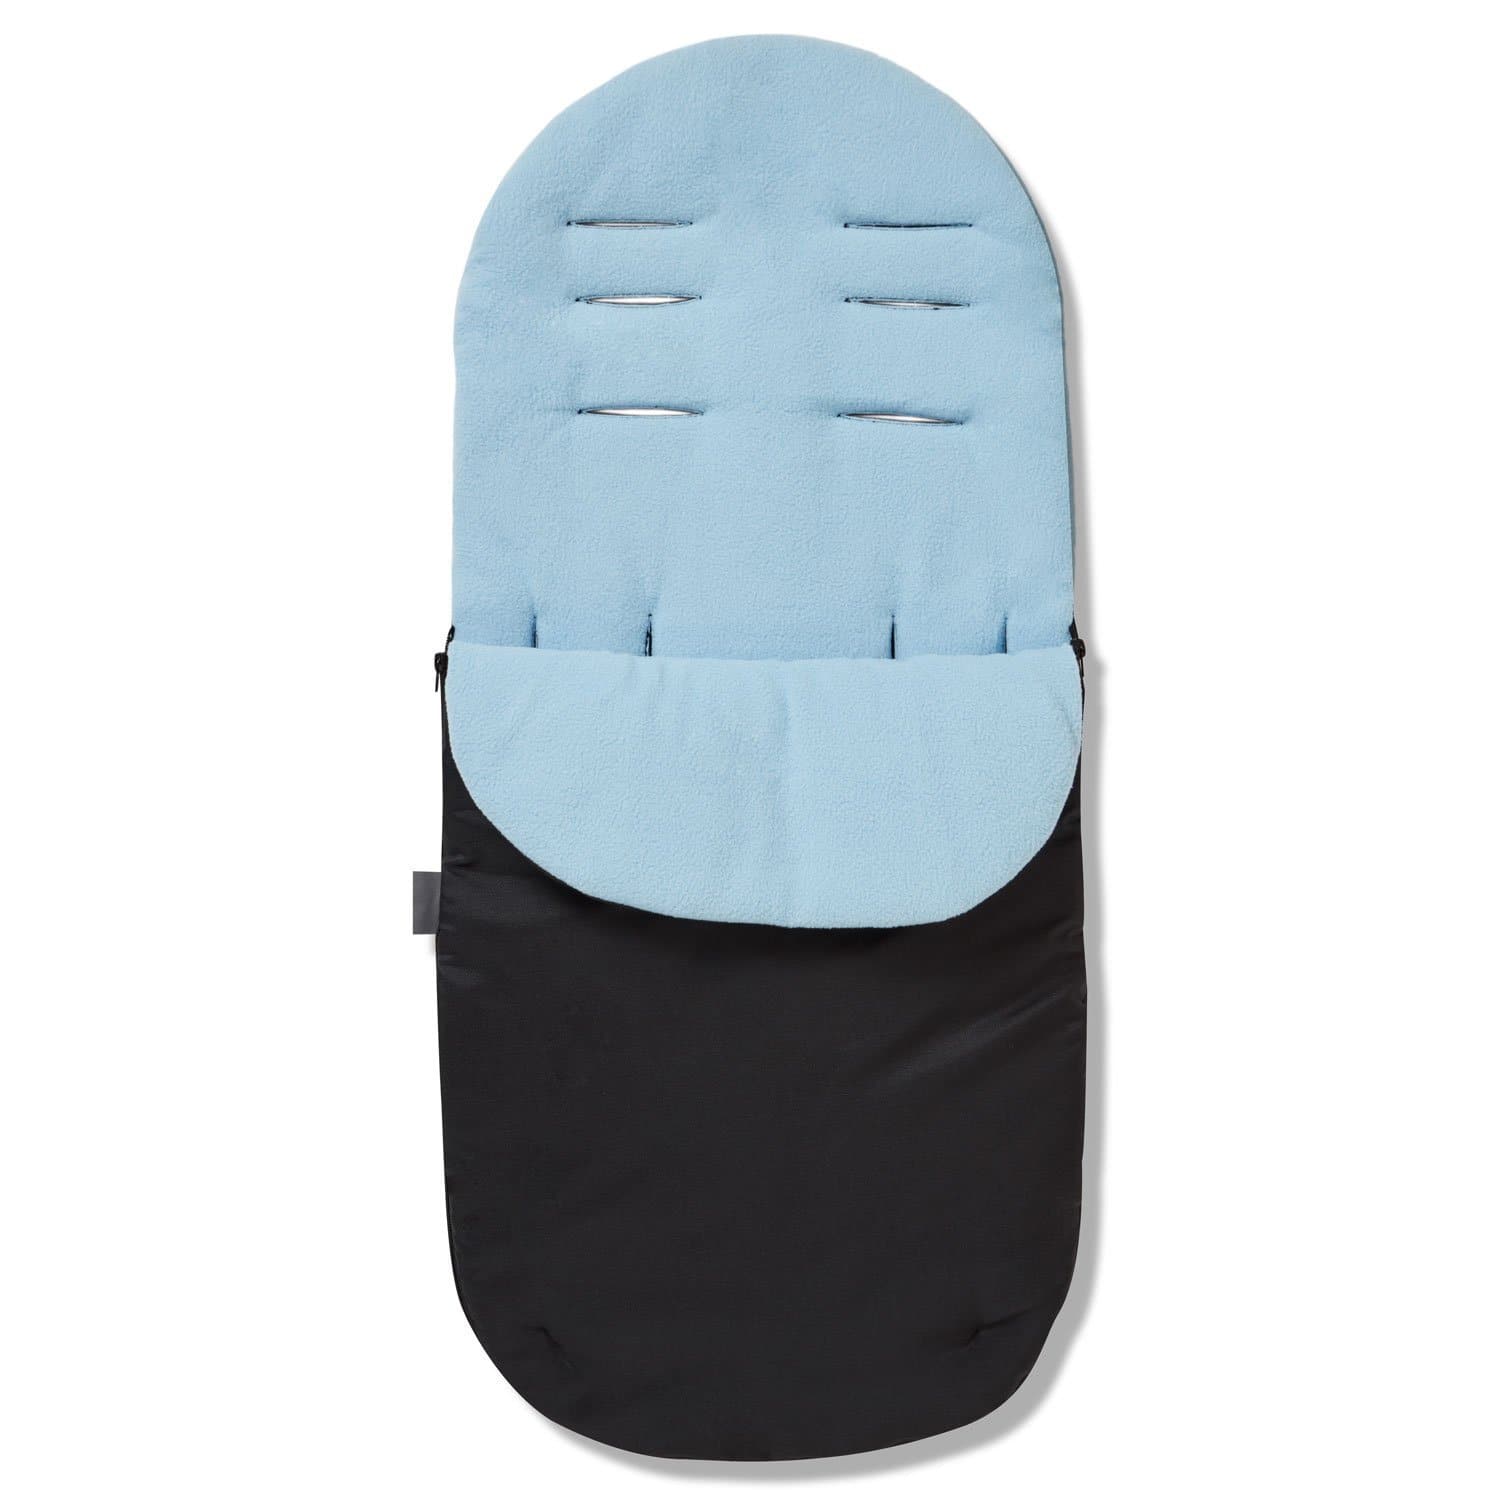 Footmuff / Cosy Toes Compatible with Bloom - Light Blue / Fits All Models | For Your Little One